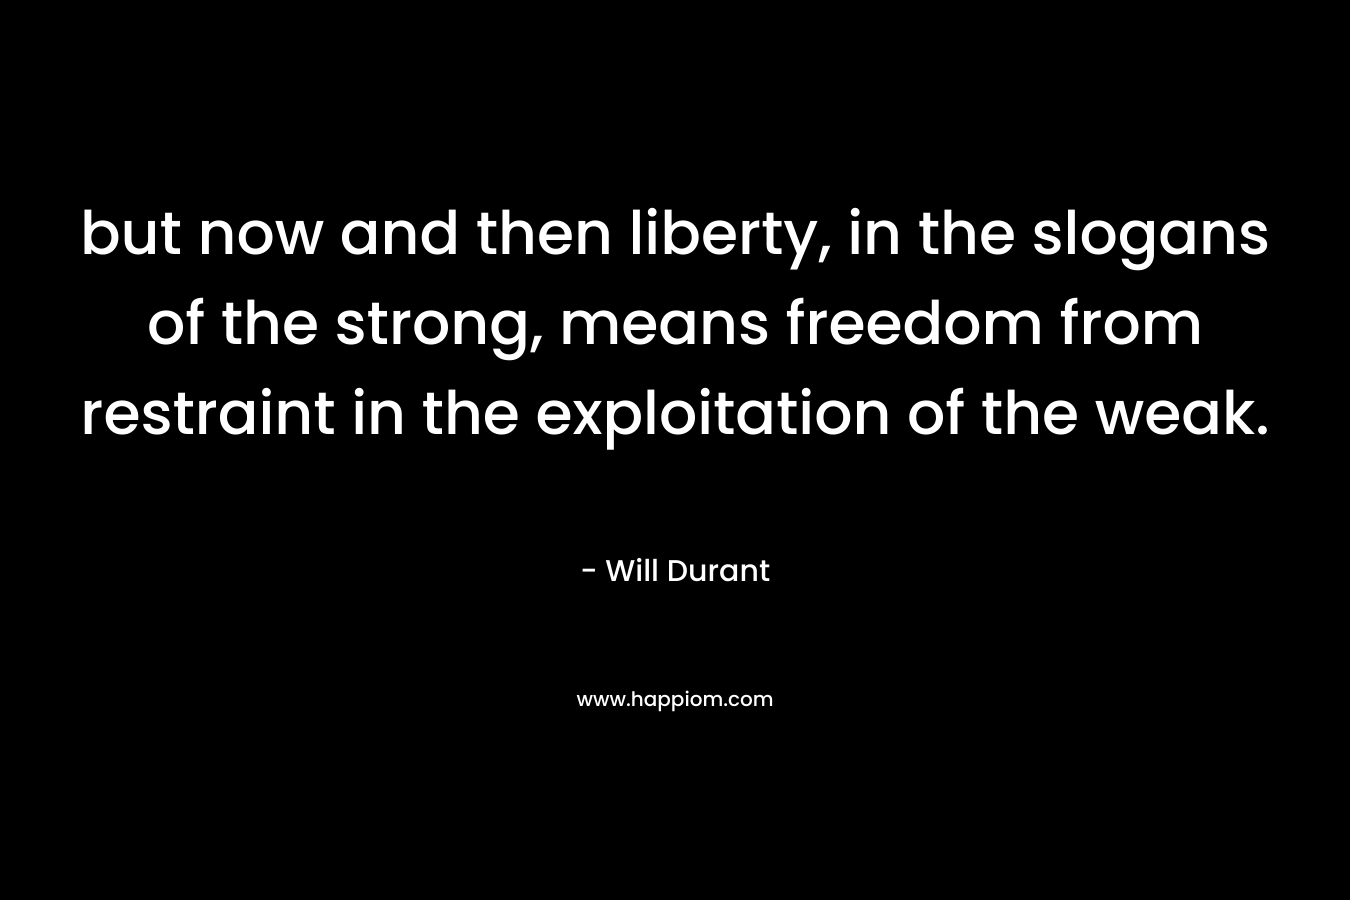 but now and then liberty, in the slogans of the strong, means freedom from restraint in the exploitation of the weak. – Will Durant